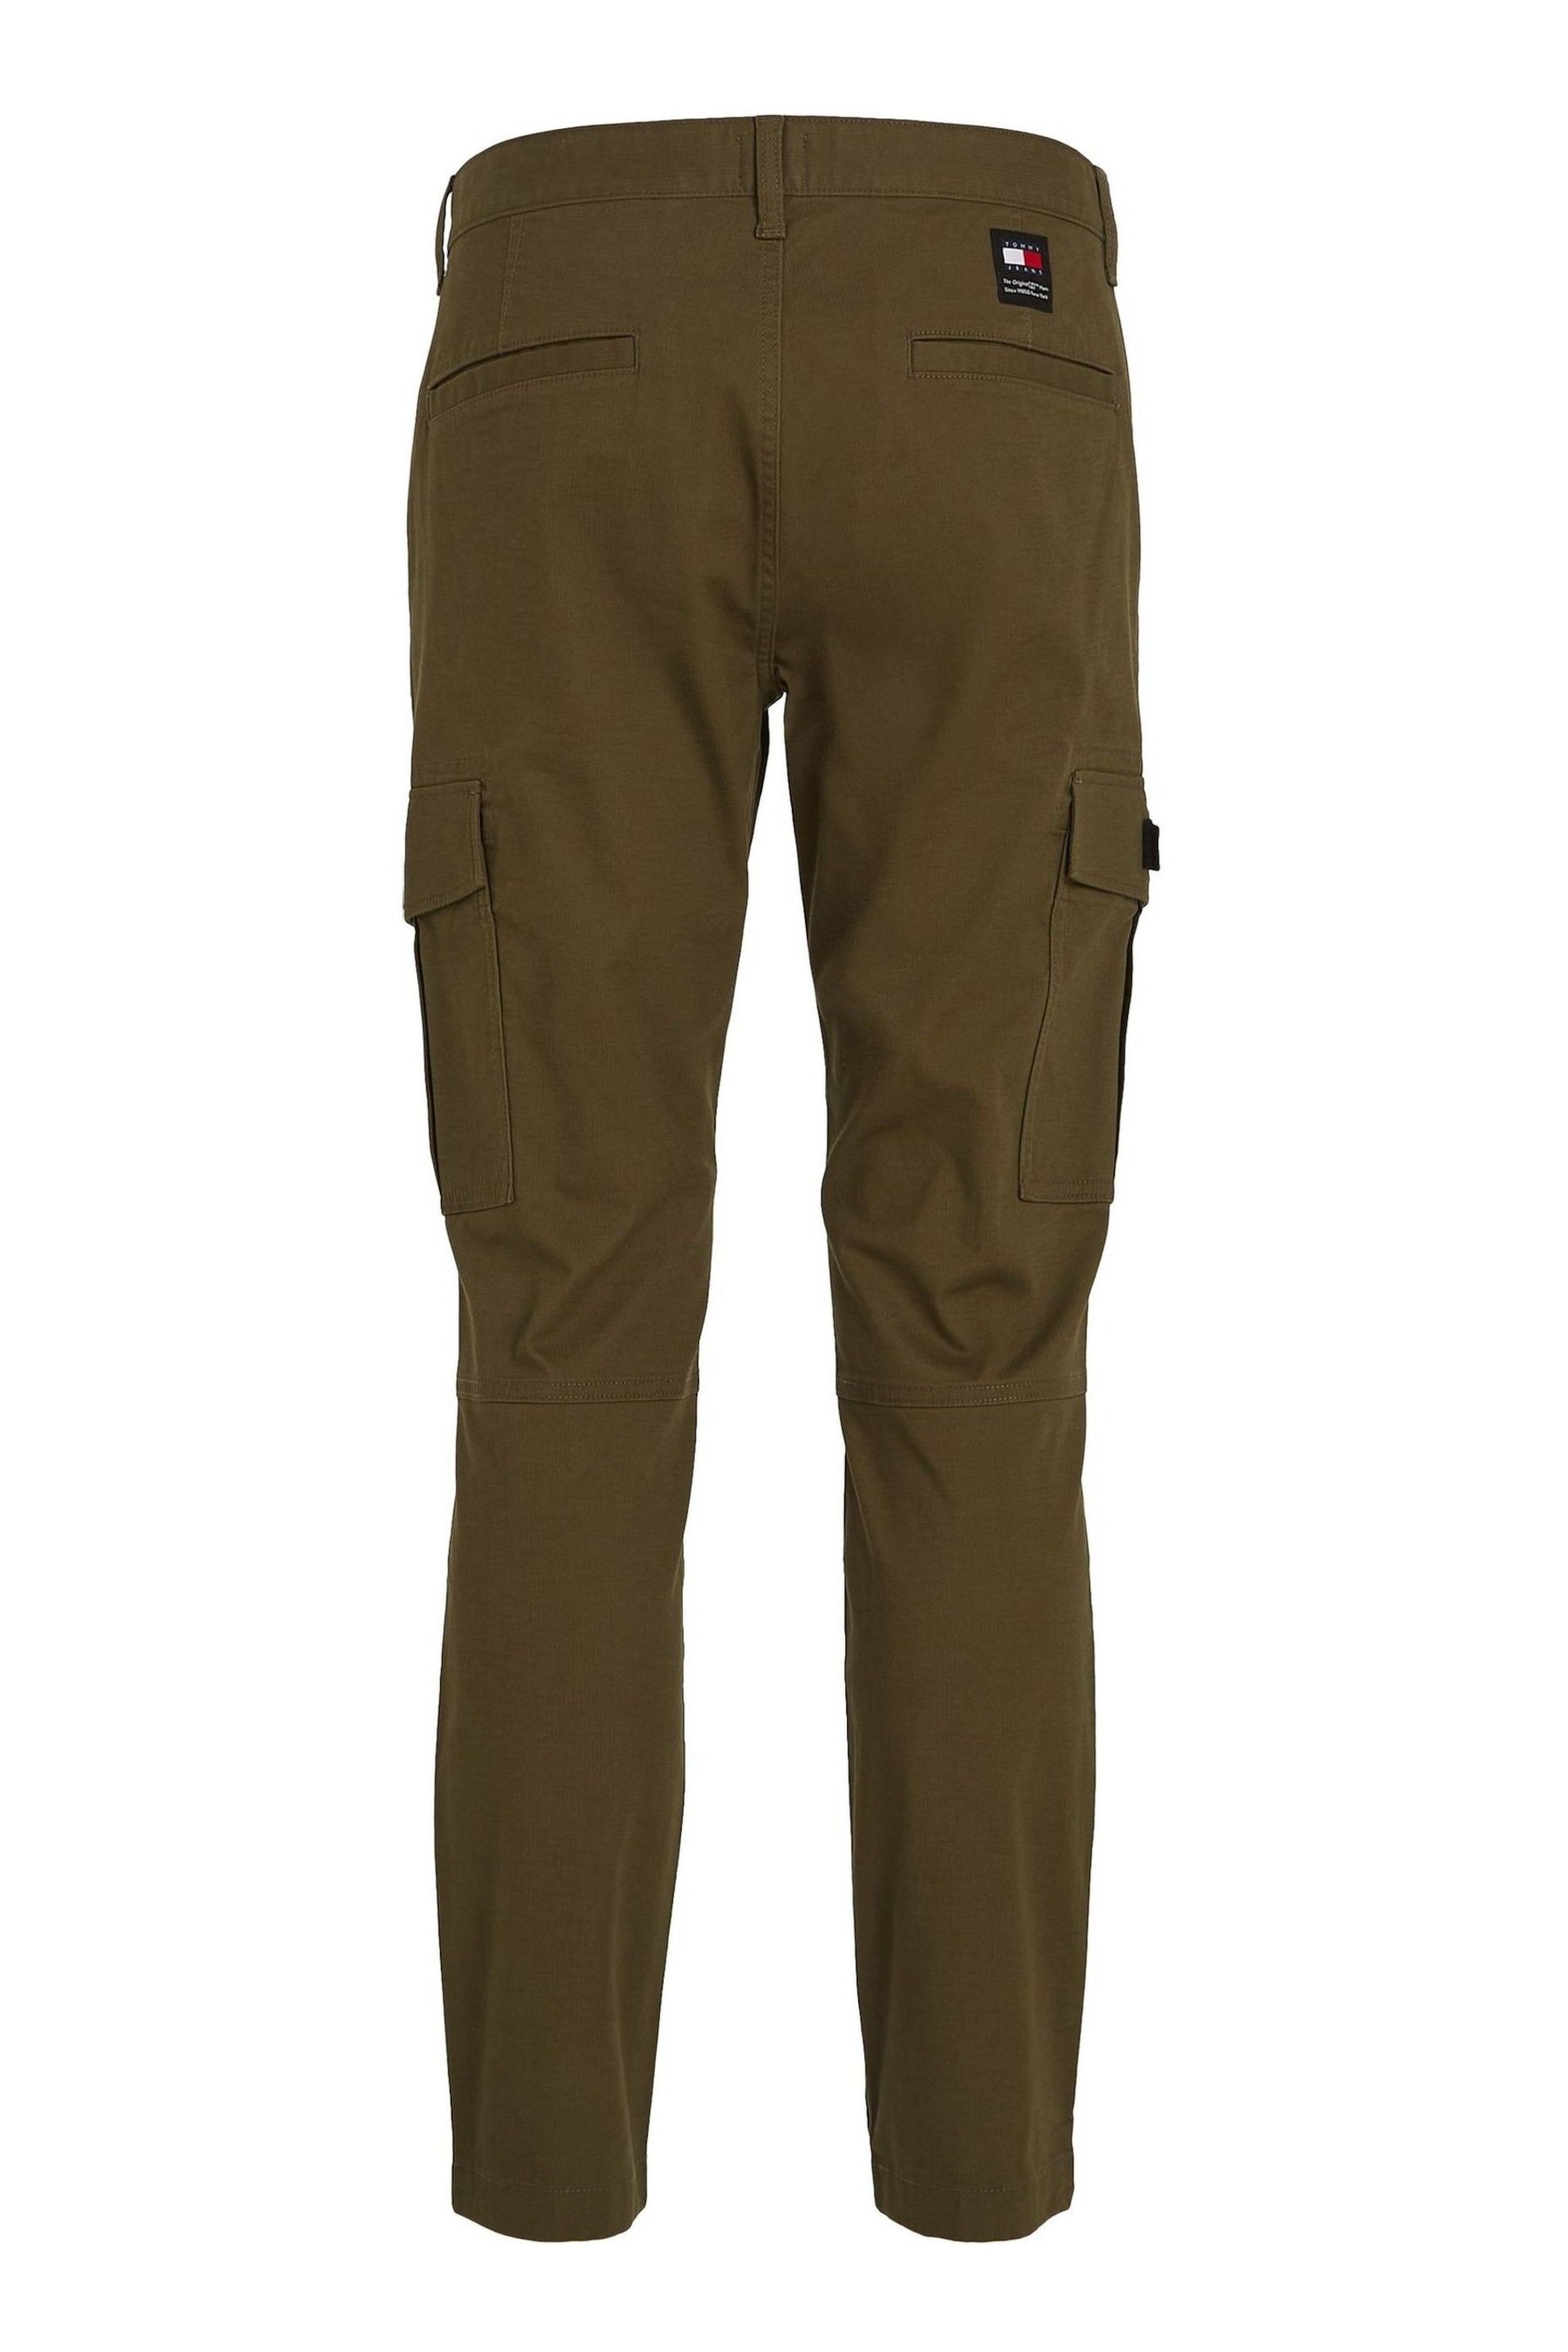 Tommy Jeans Austin Cargo Trousers - Image 4 of 6